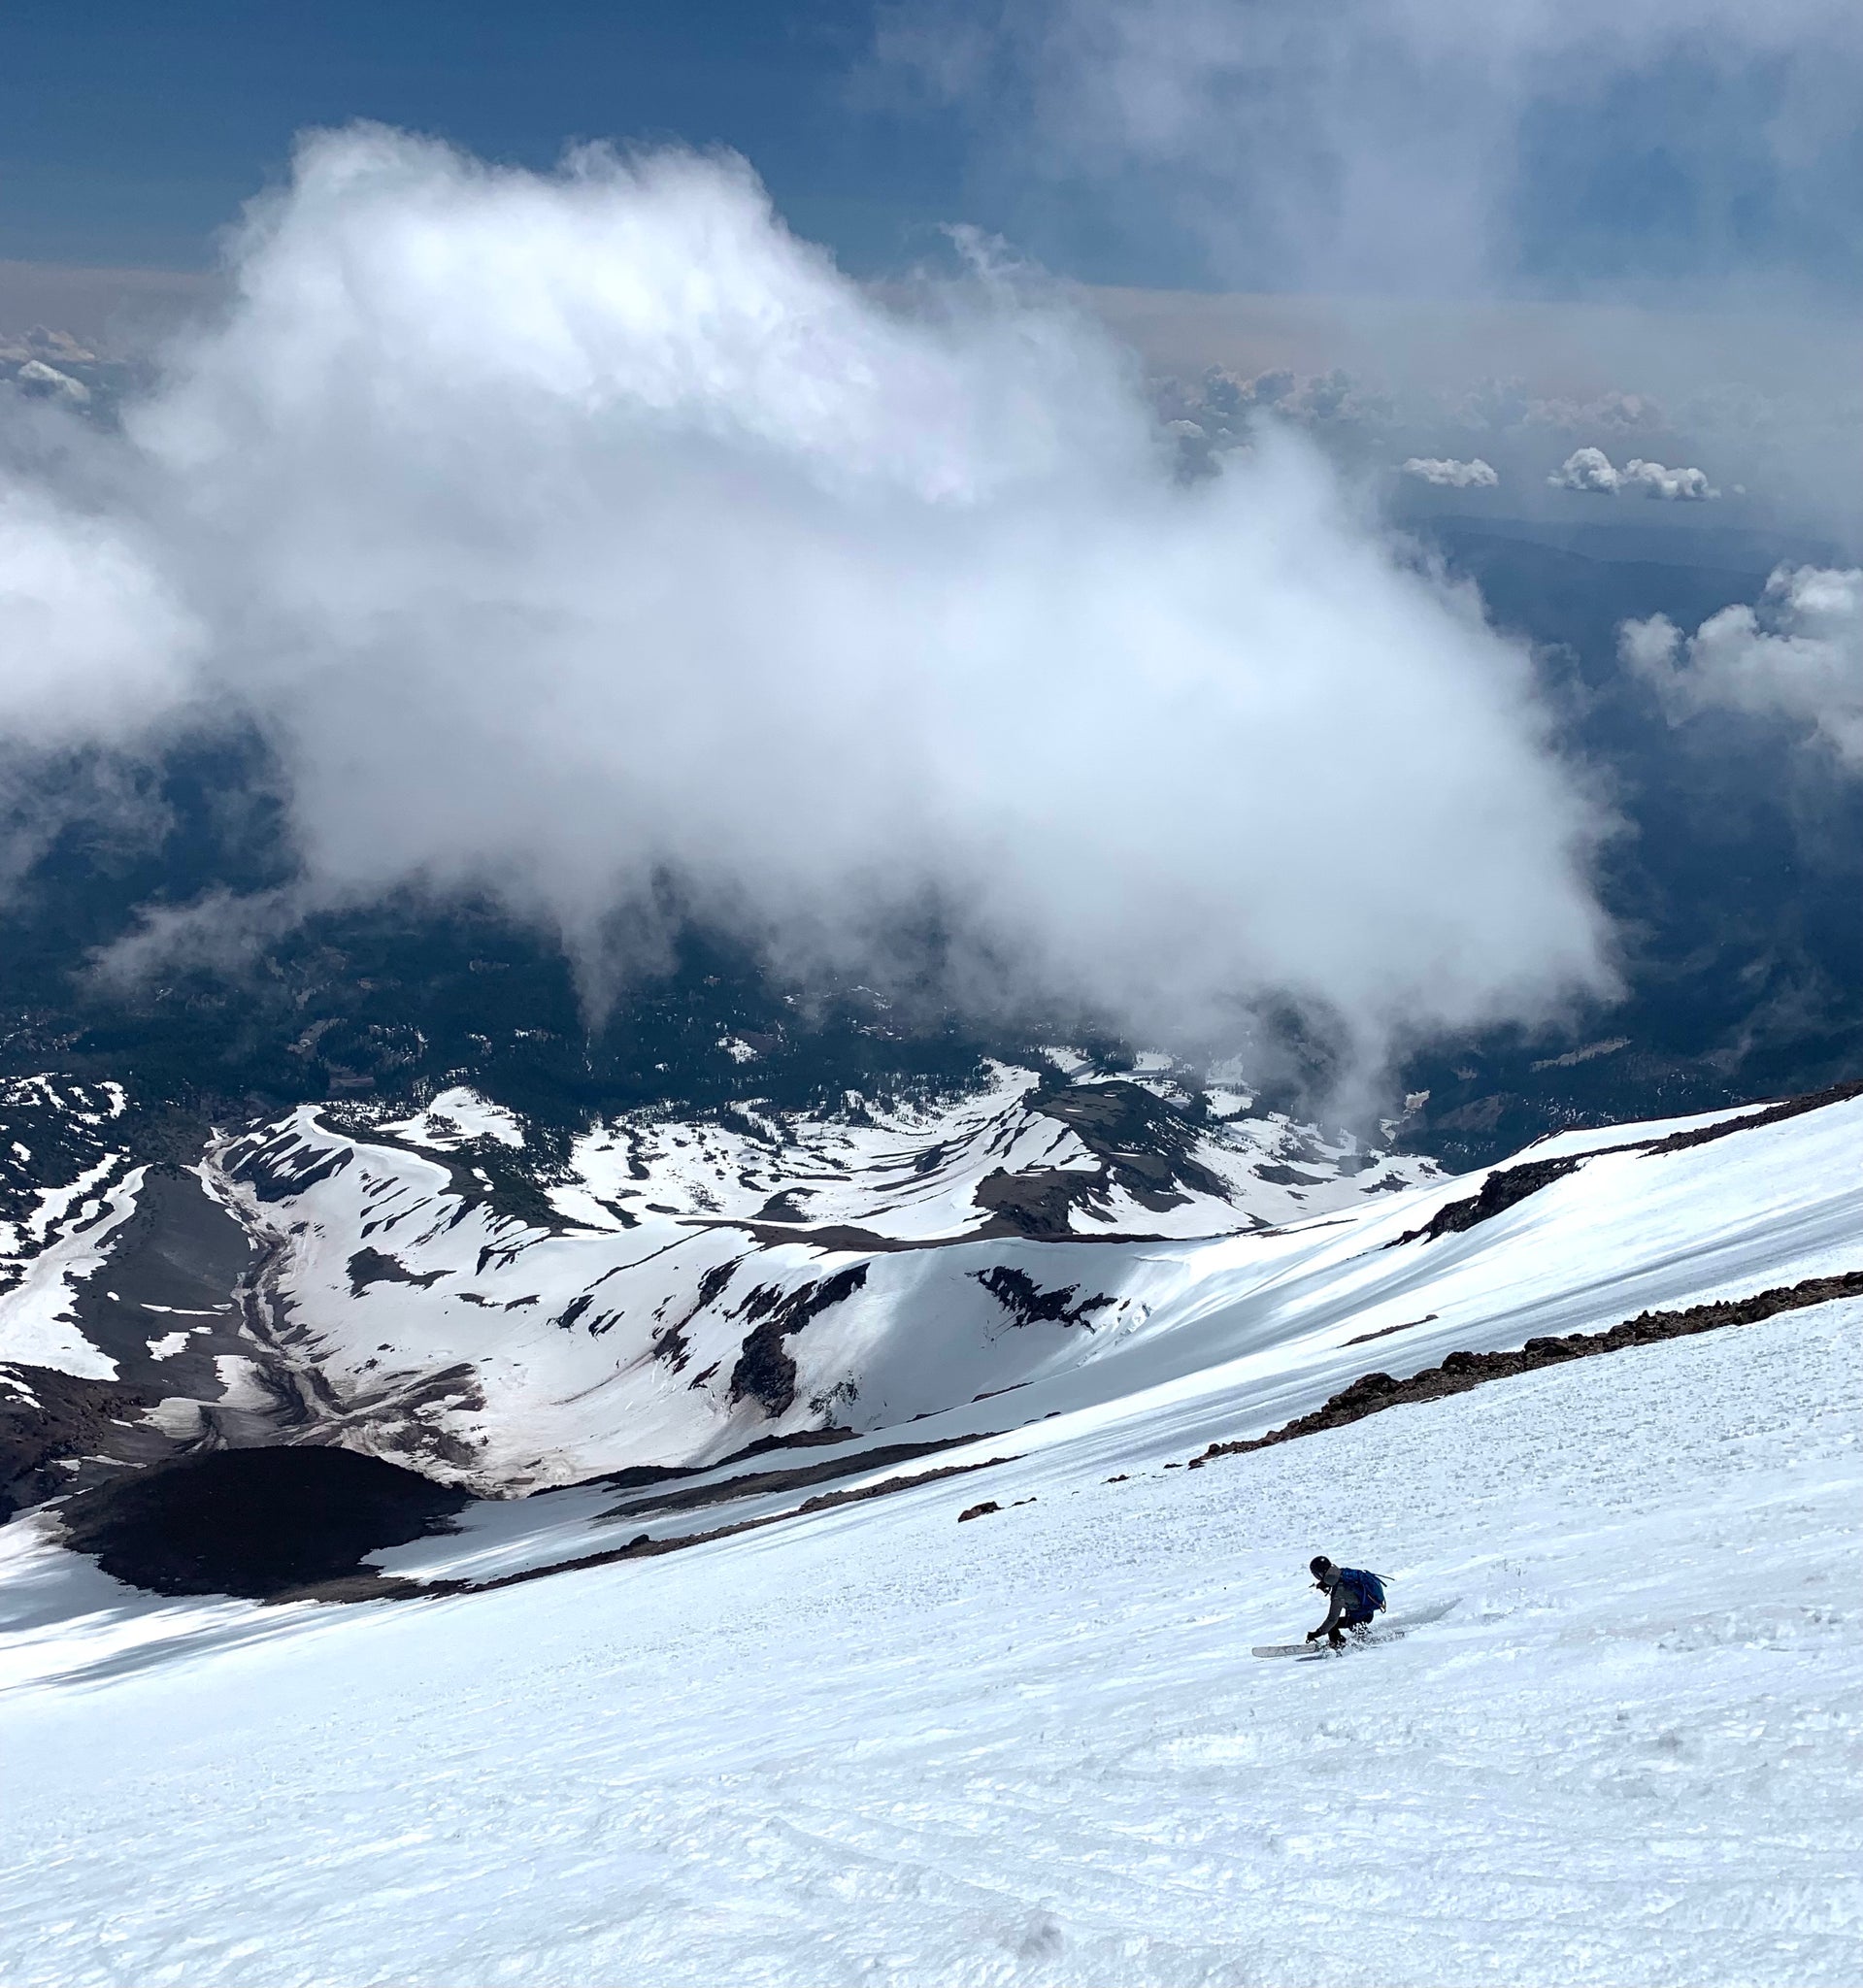 Mount Shasta spring skiing for thousands of feet in corn snow after summiting